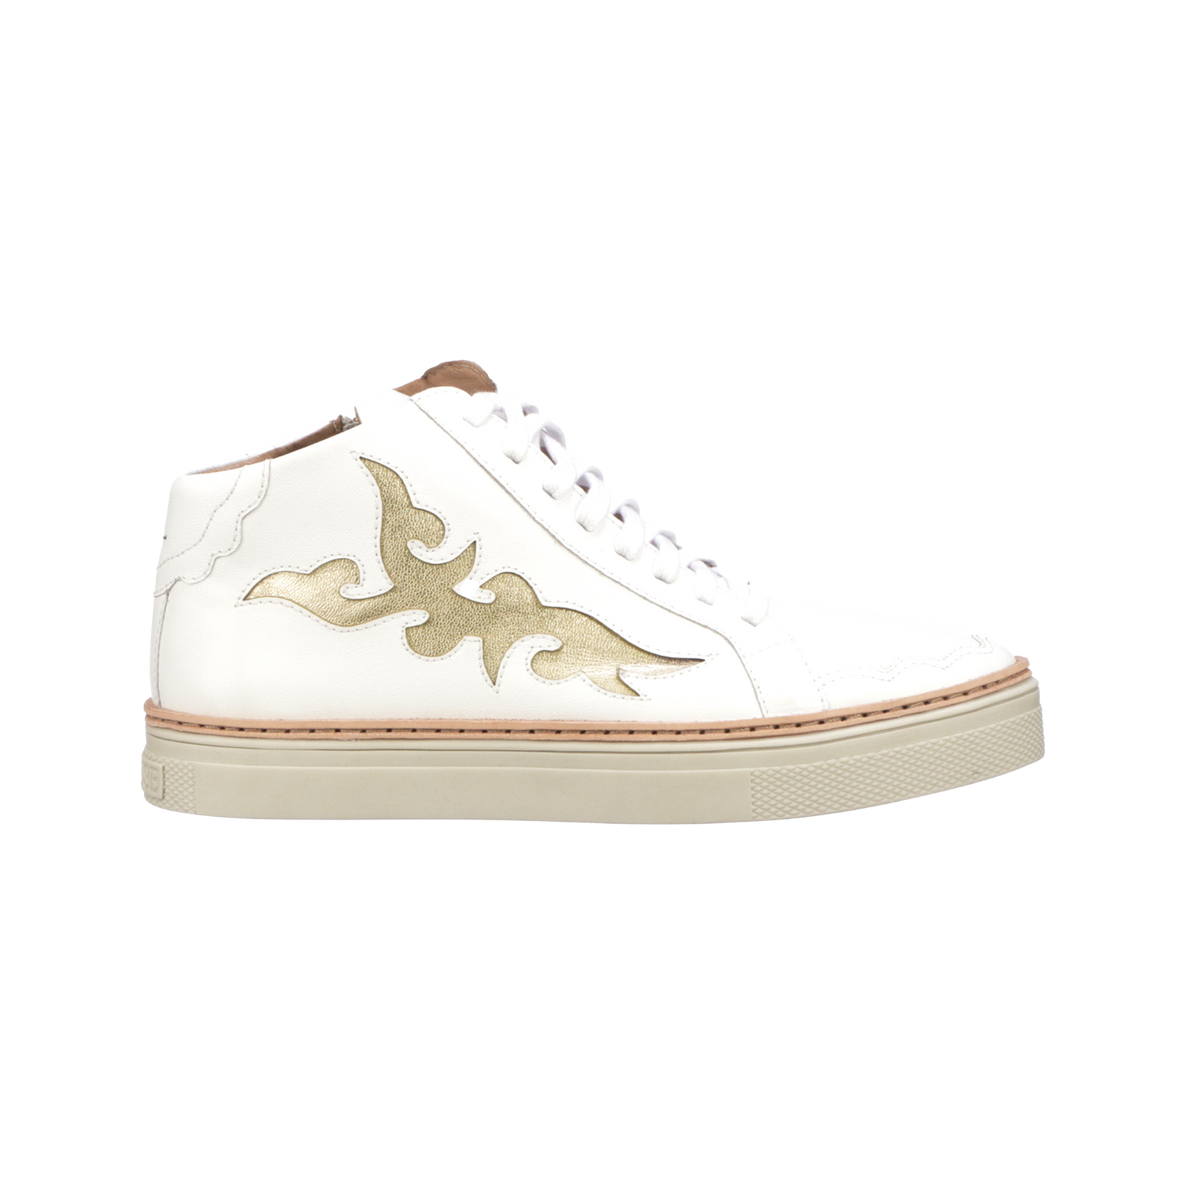 After Ride Low Top Sneaker :: White